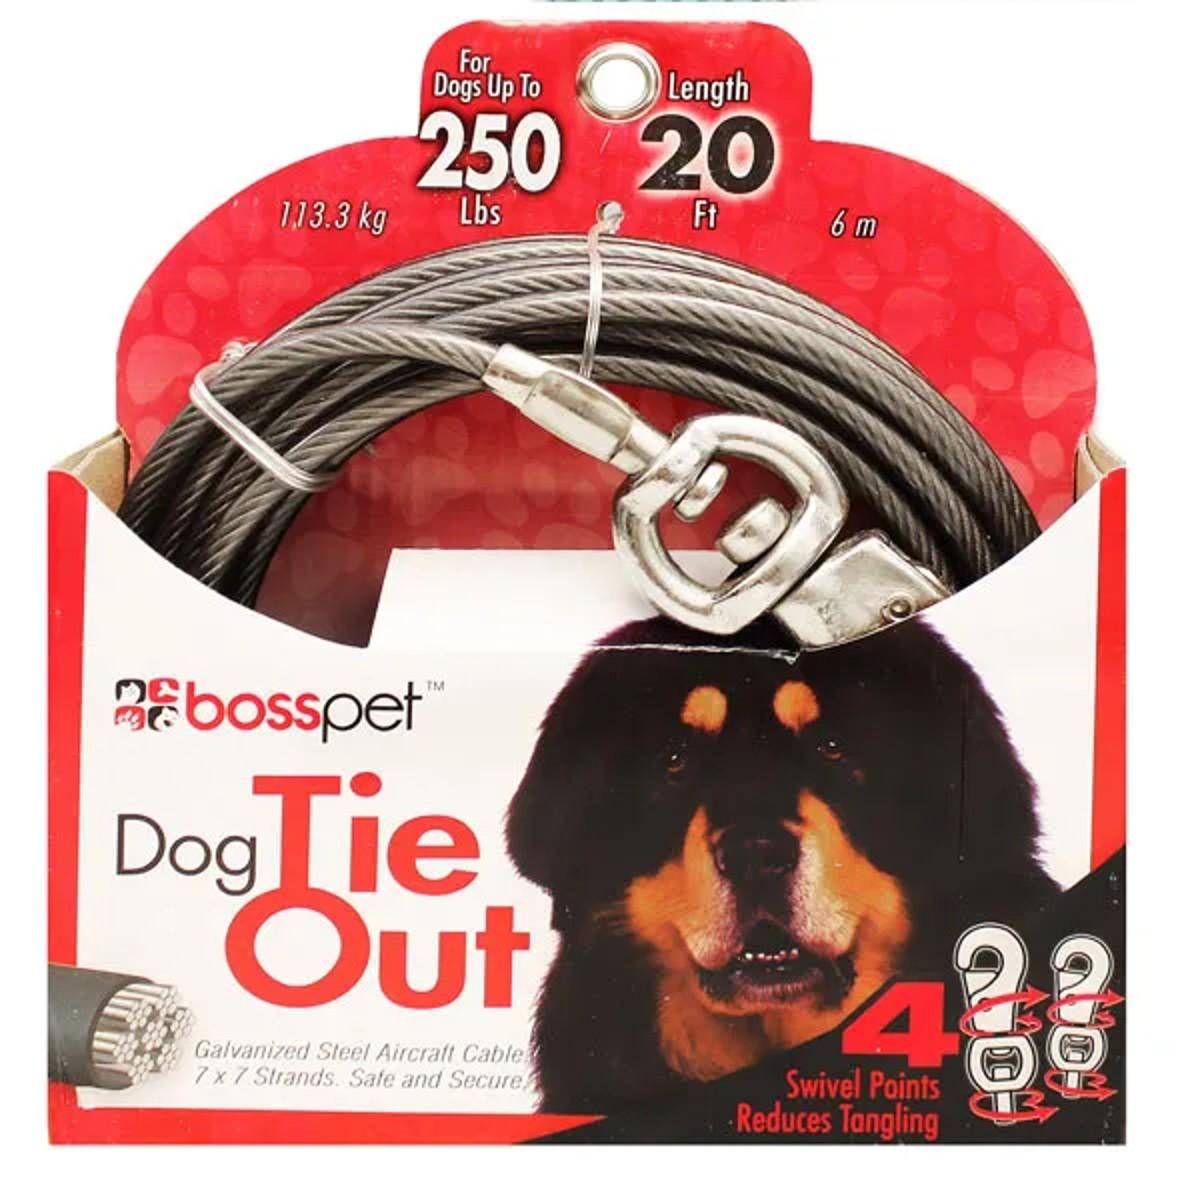 Boss Pet Twin-Swivel Vinyl Coated Cable Dog Tie-Out - XX-Large Dog up to 250lbs